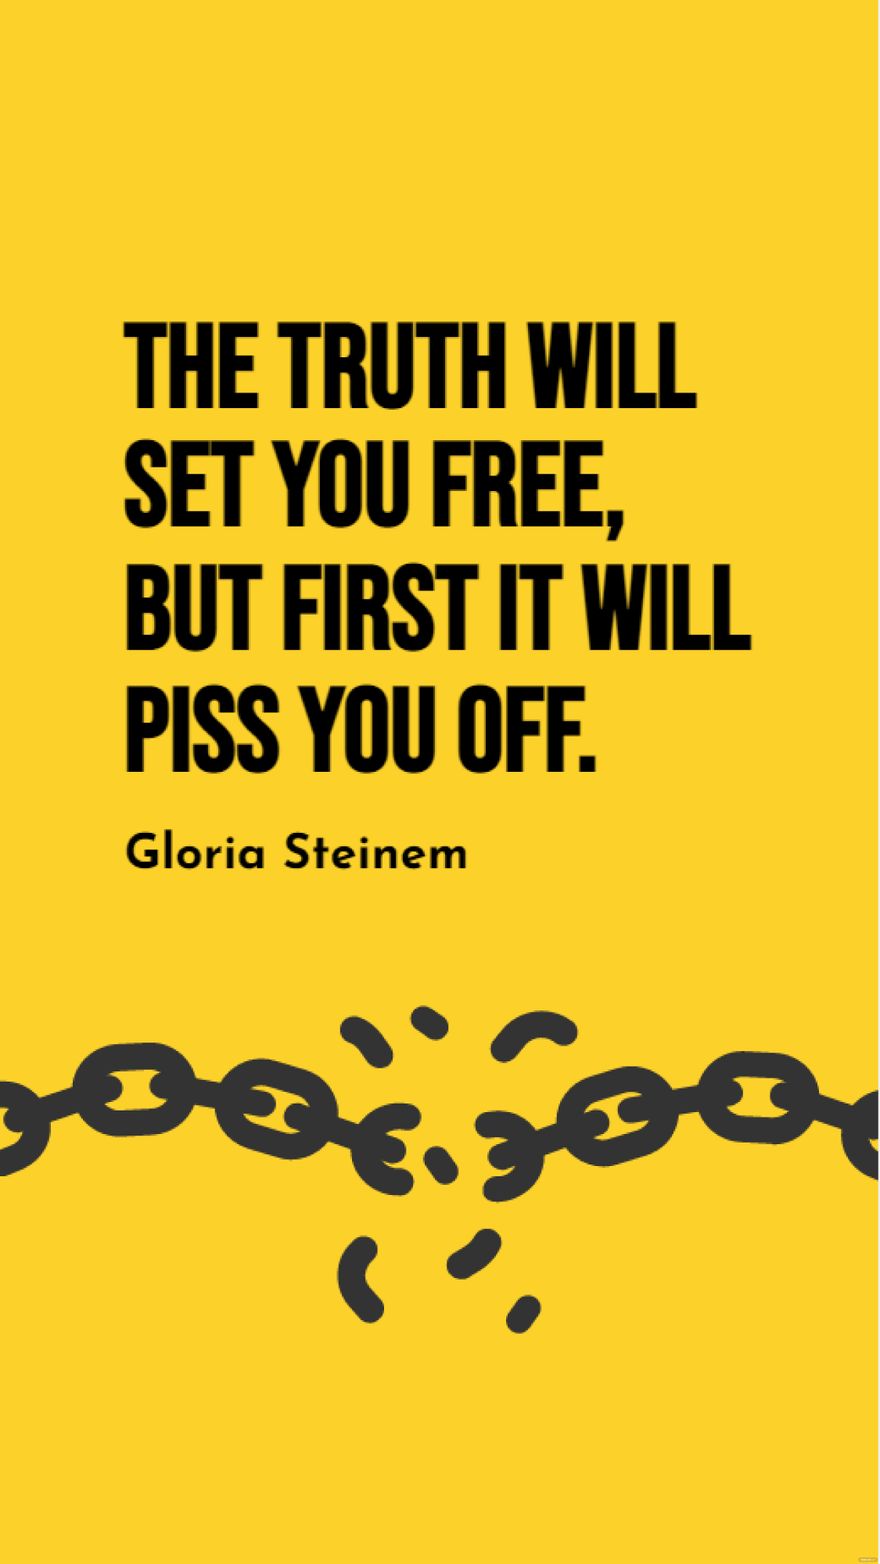 Free Gloria Steinem - The truth will set you free, but first it will piss you off. in JPG